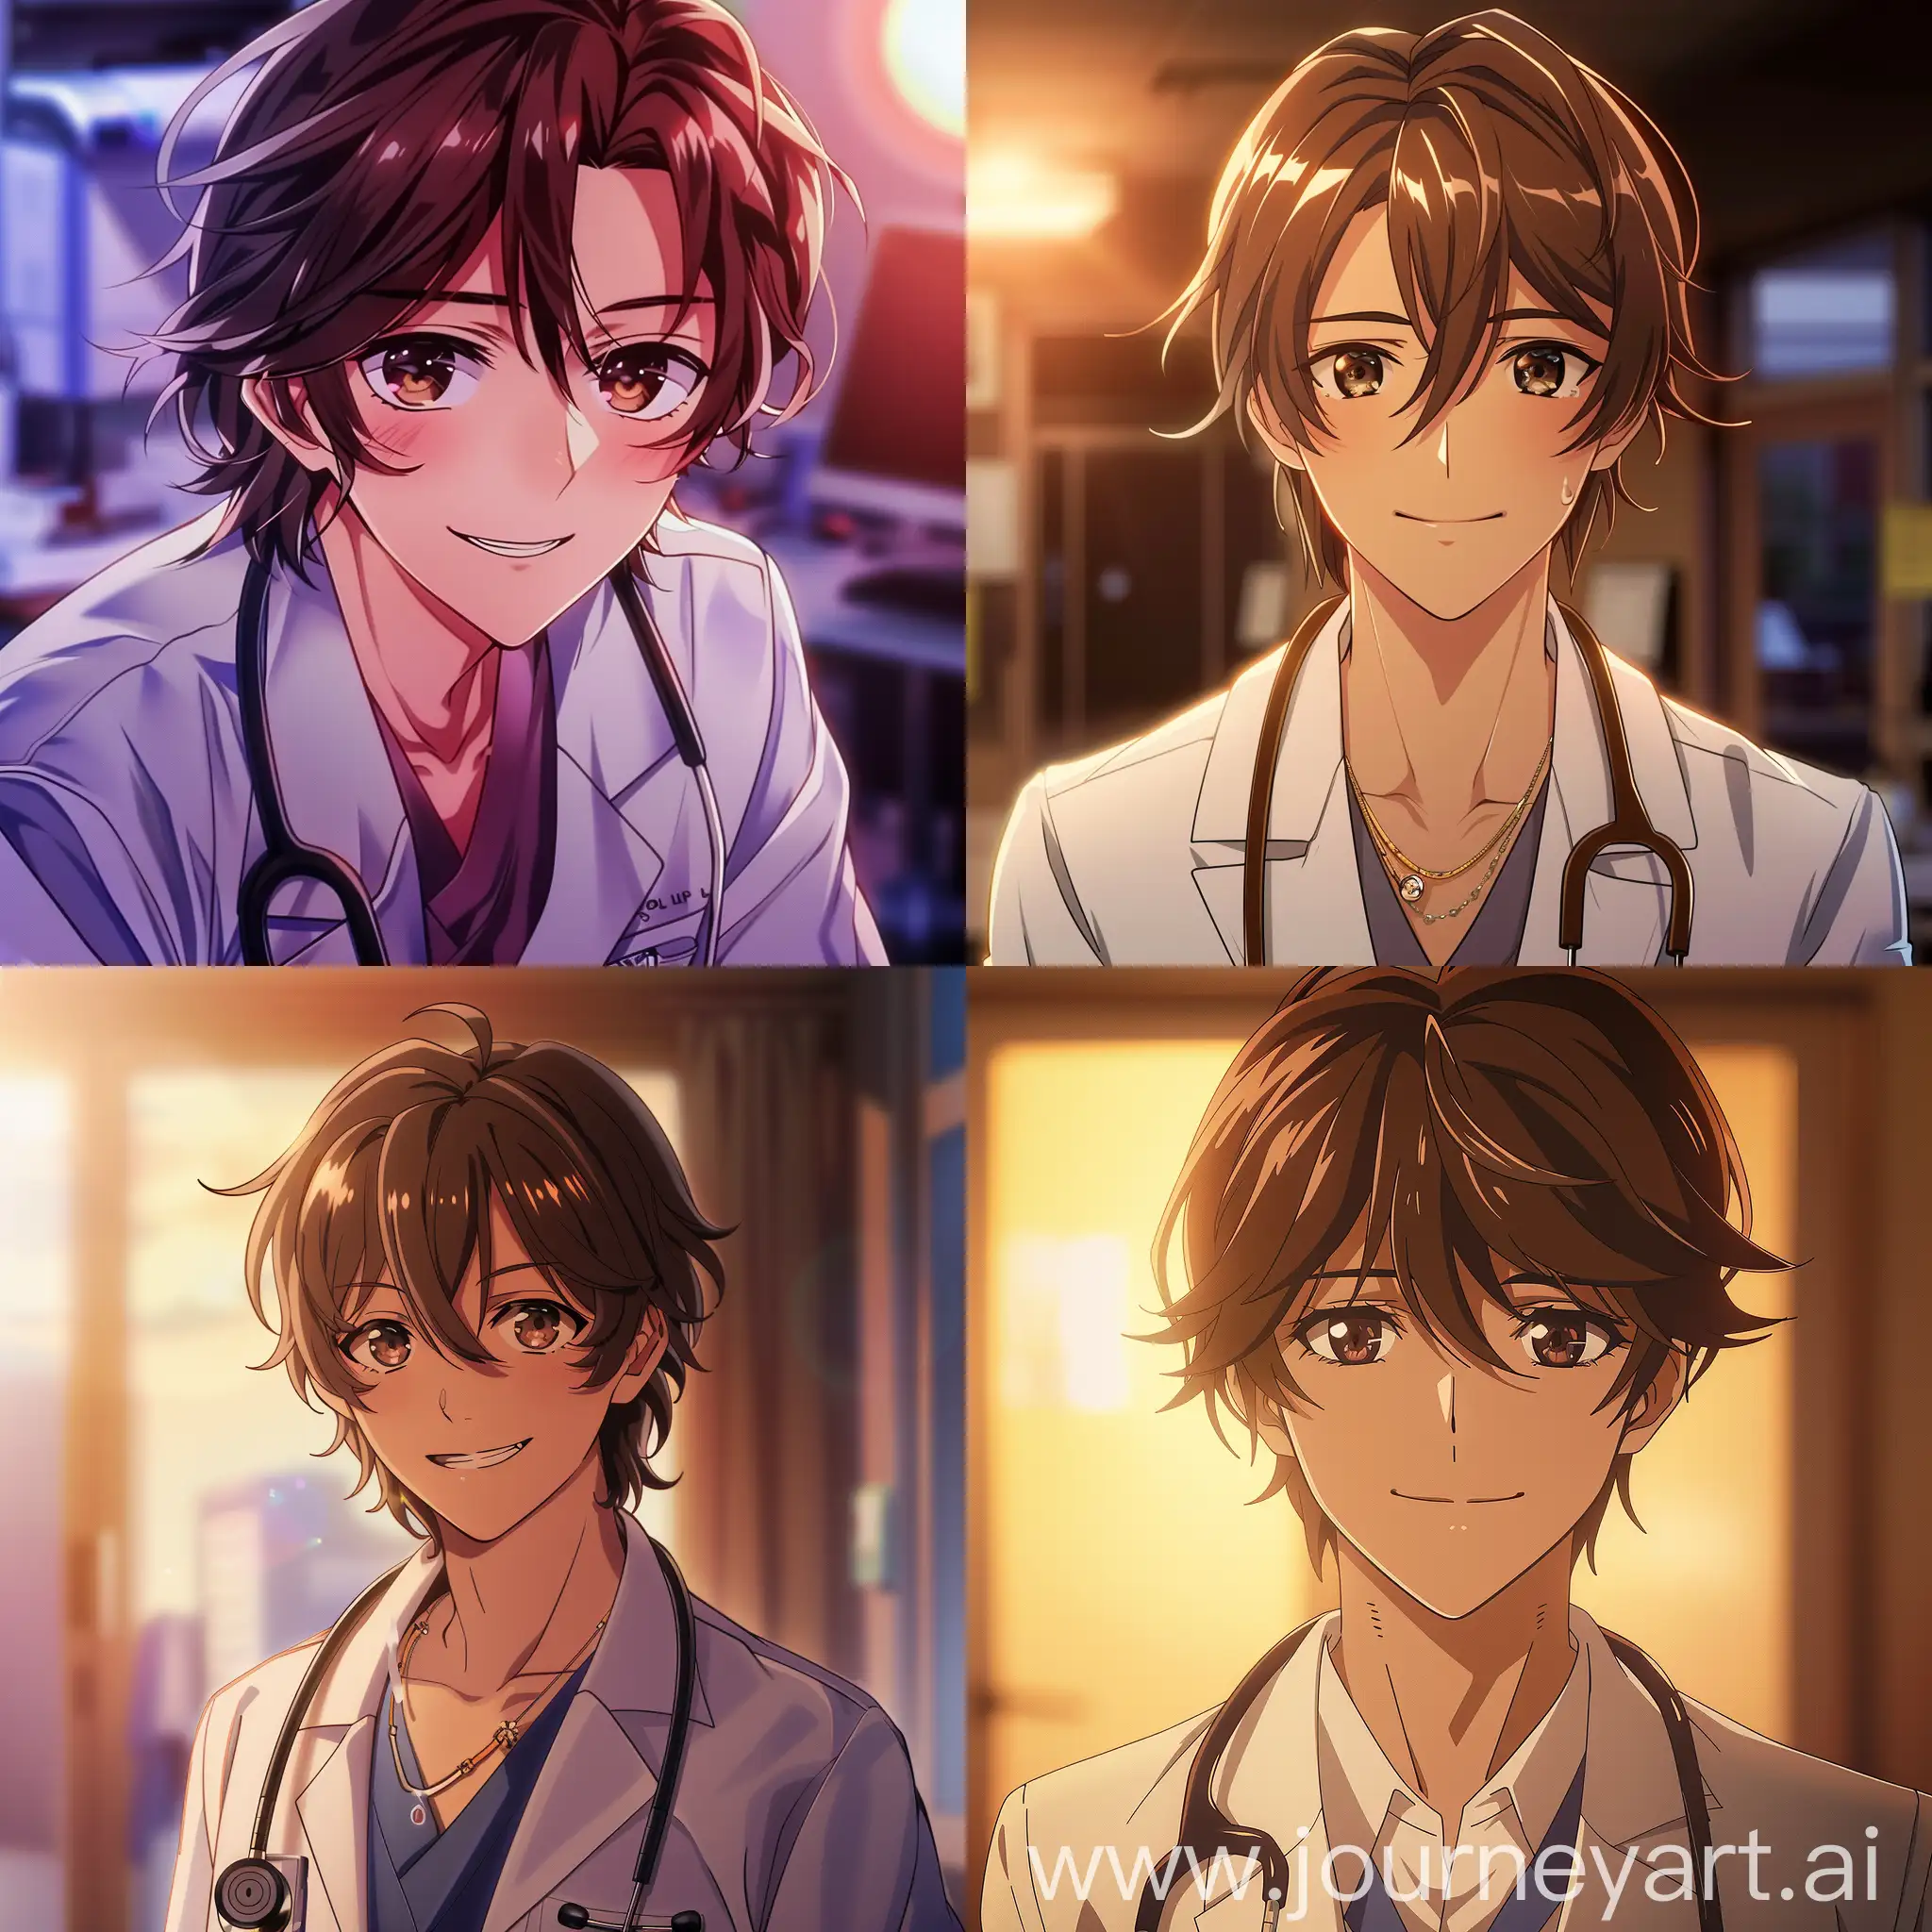 Mysterious-Anime-Doctor-with-Medium-Length-Brown-Hair-and-Deep-Brown-Eyes